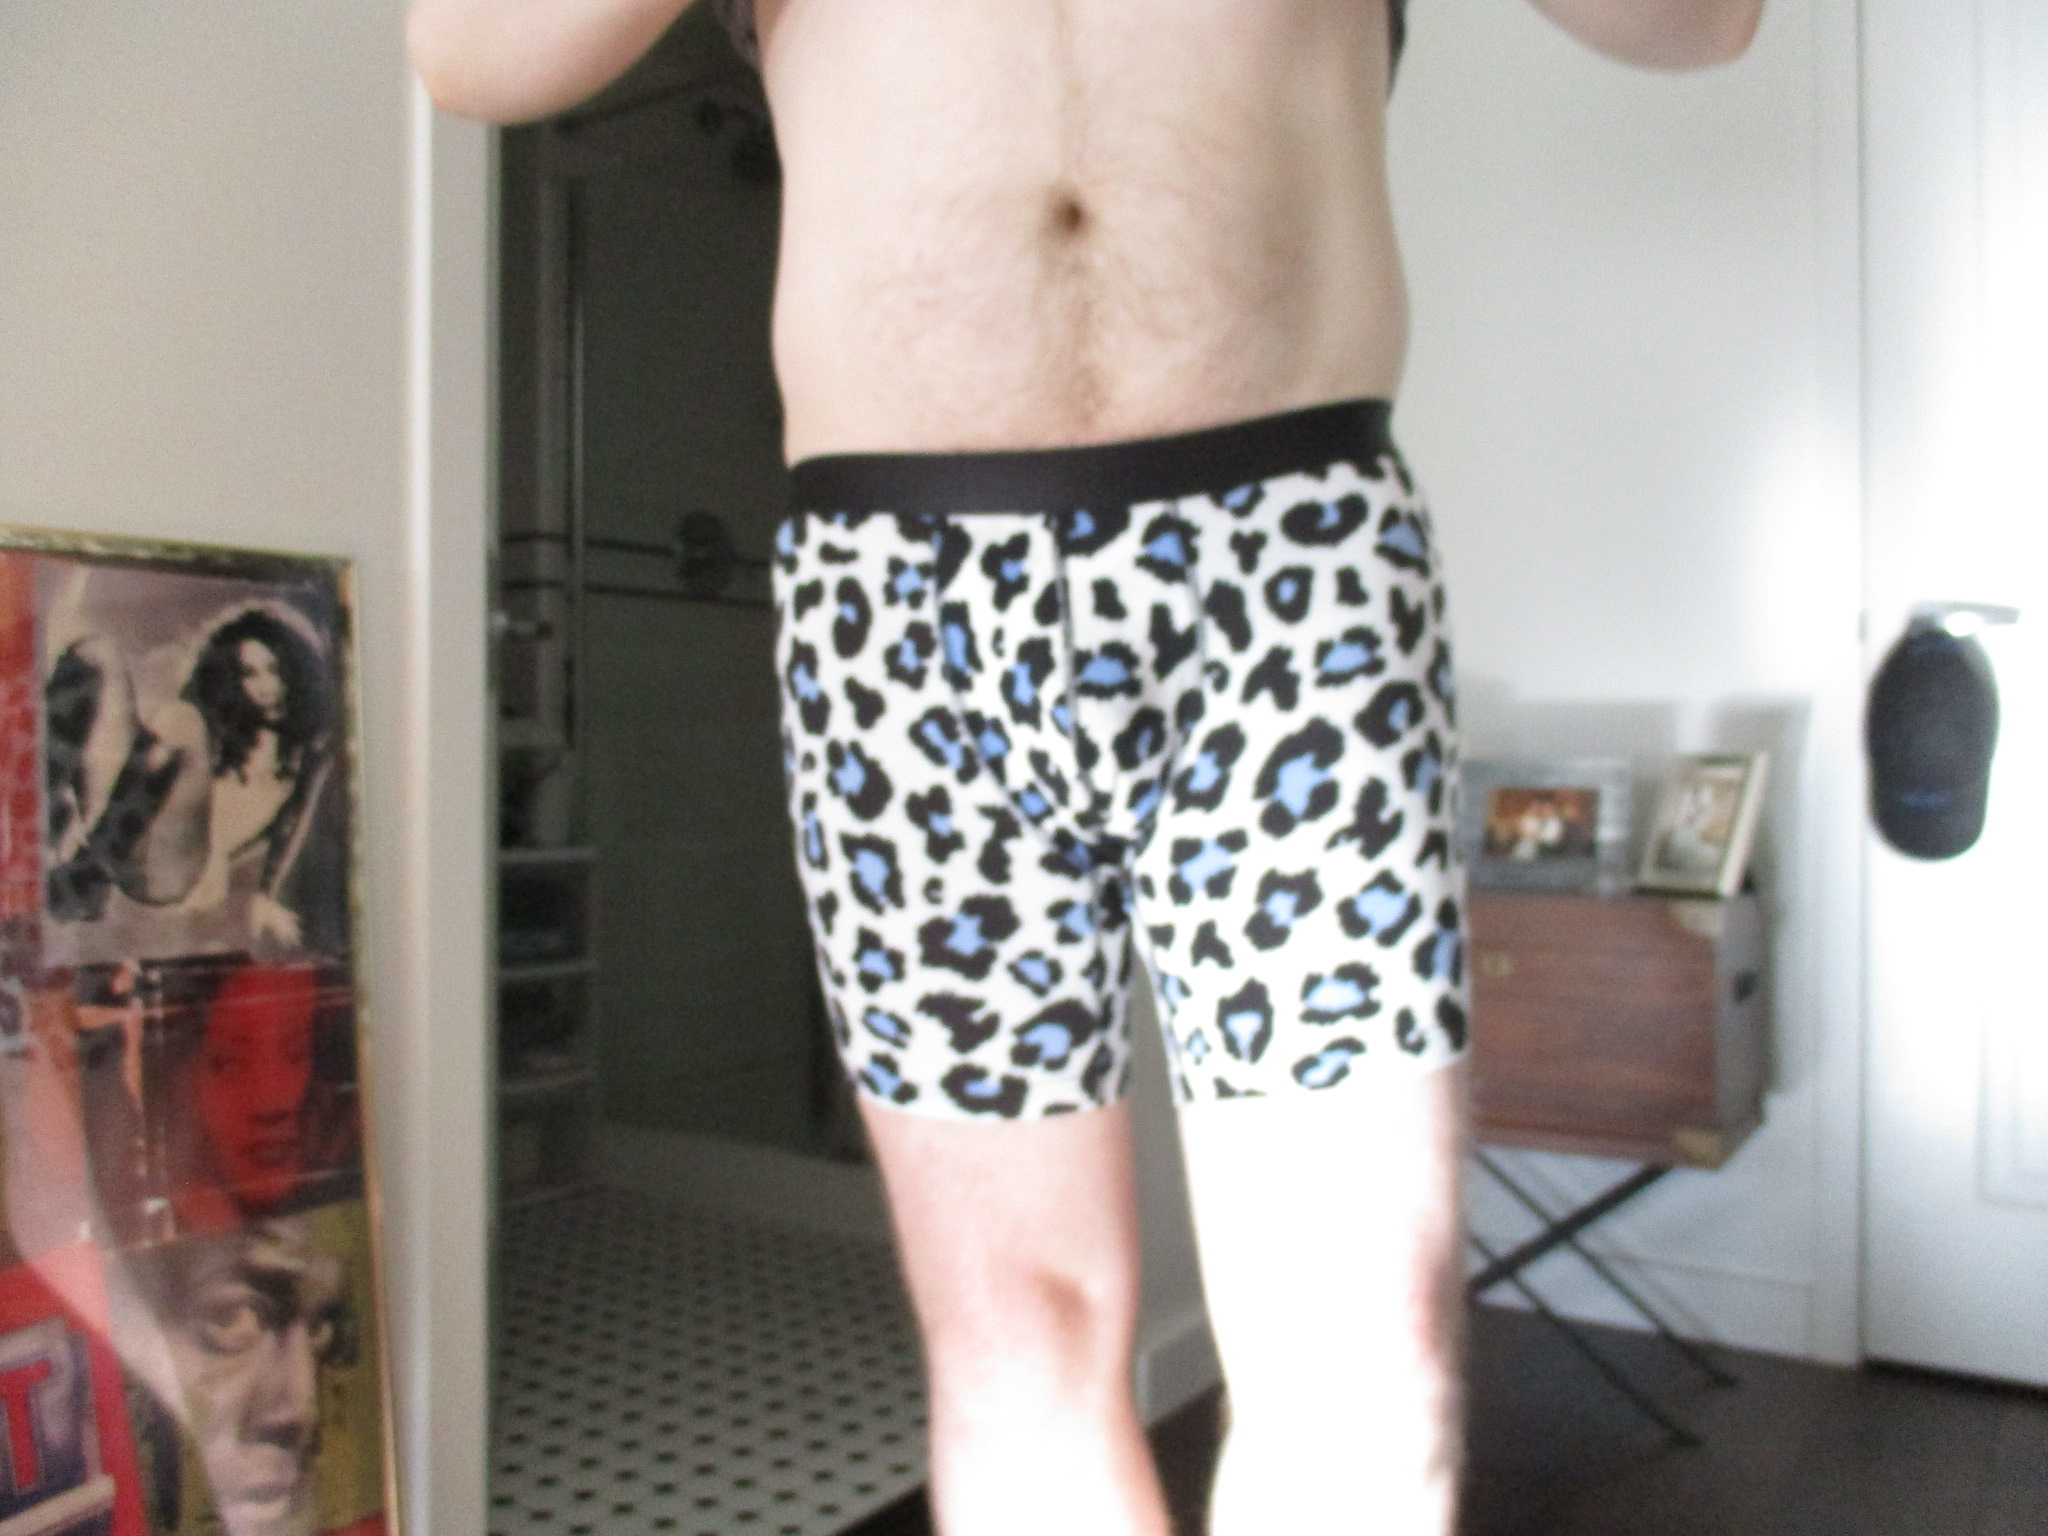 Me Undies…more experimenting with pattern and style